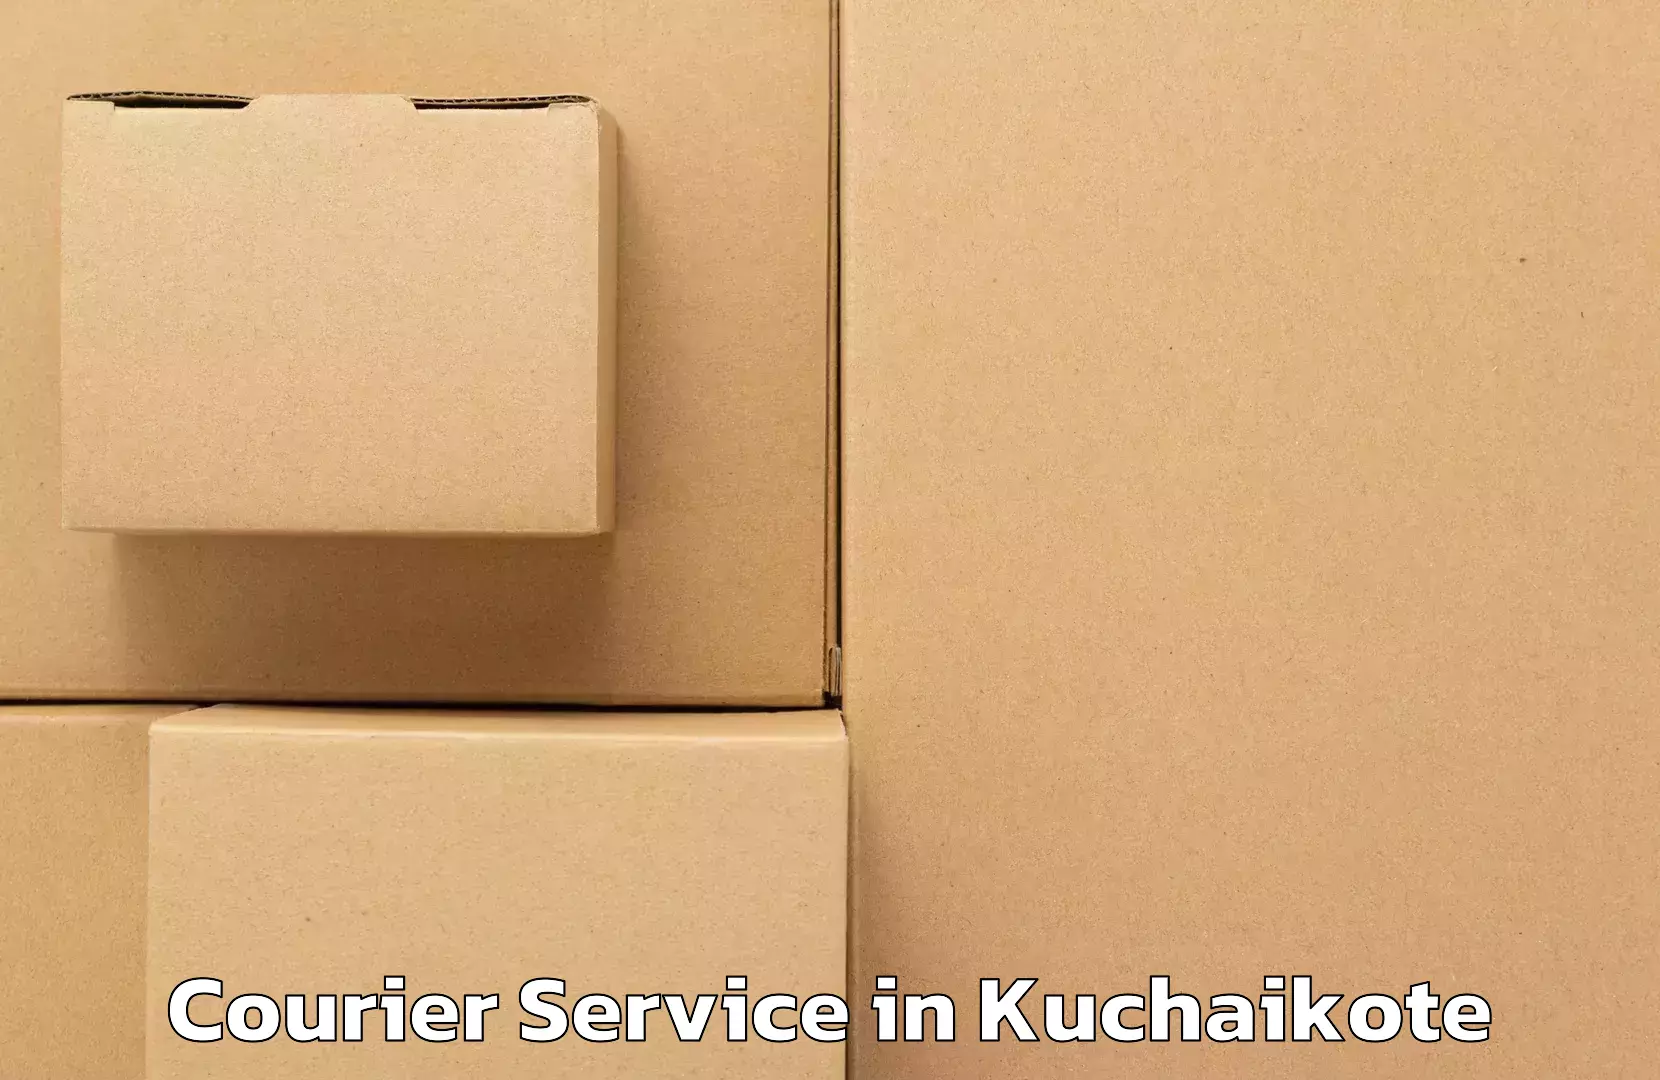 High-priority parcel service in Kuchaikote